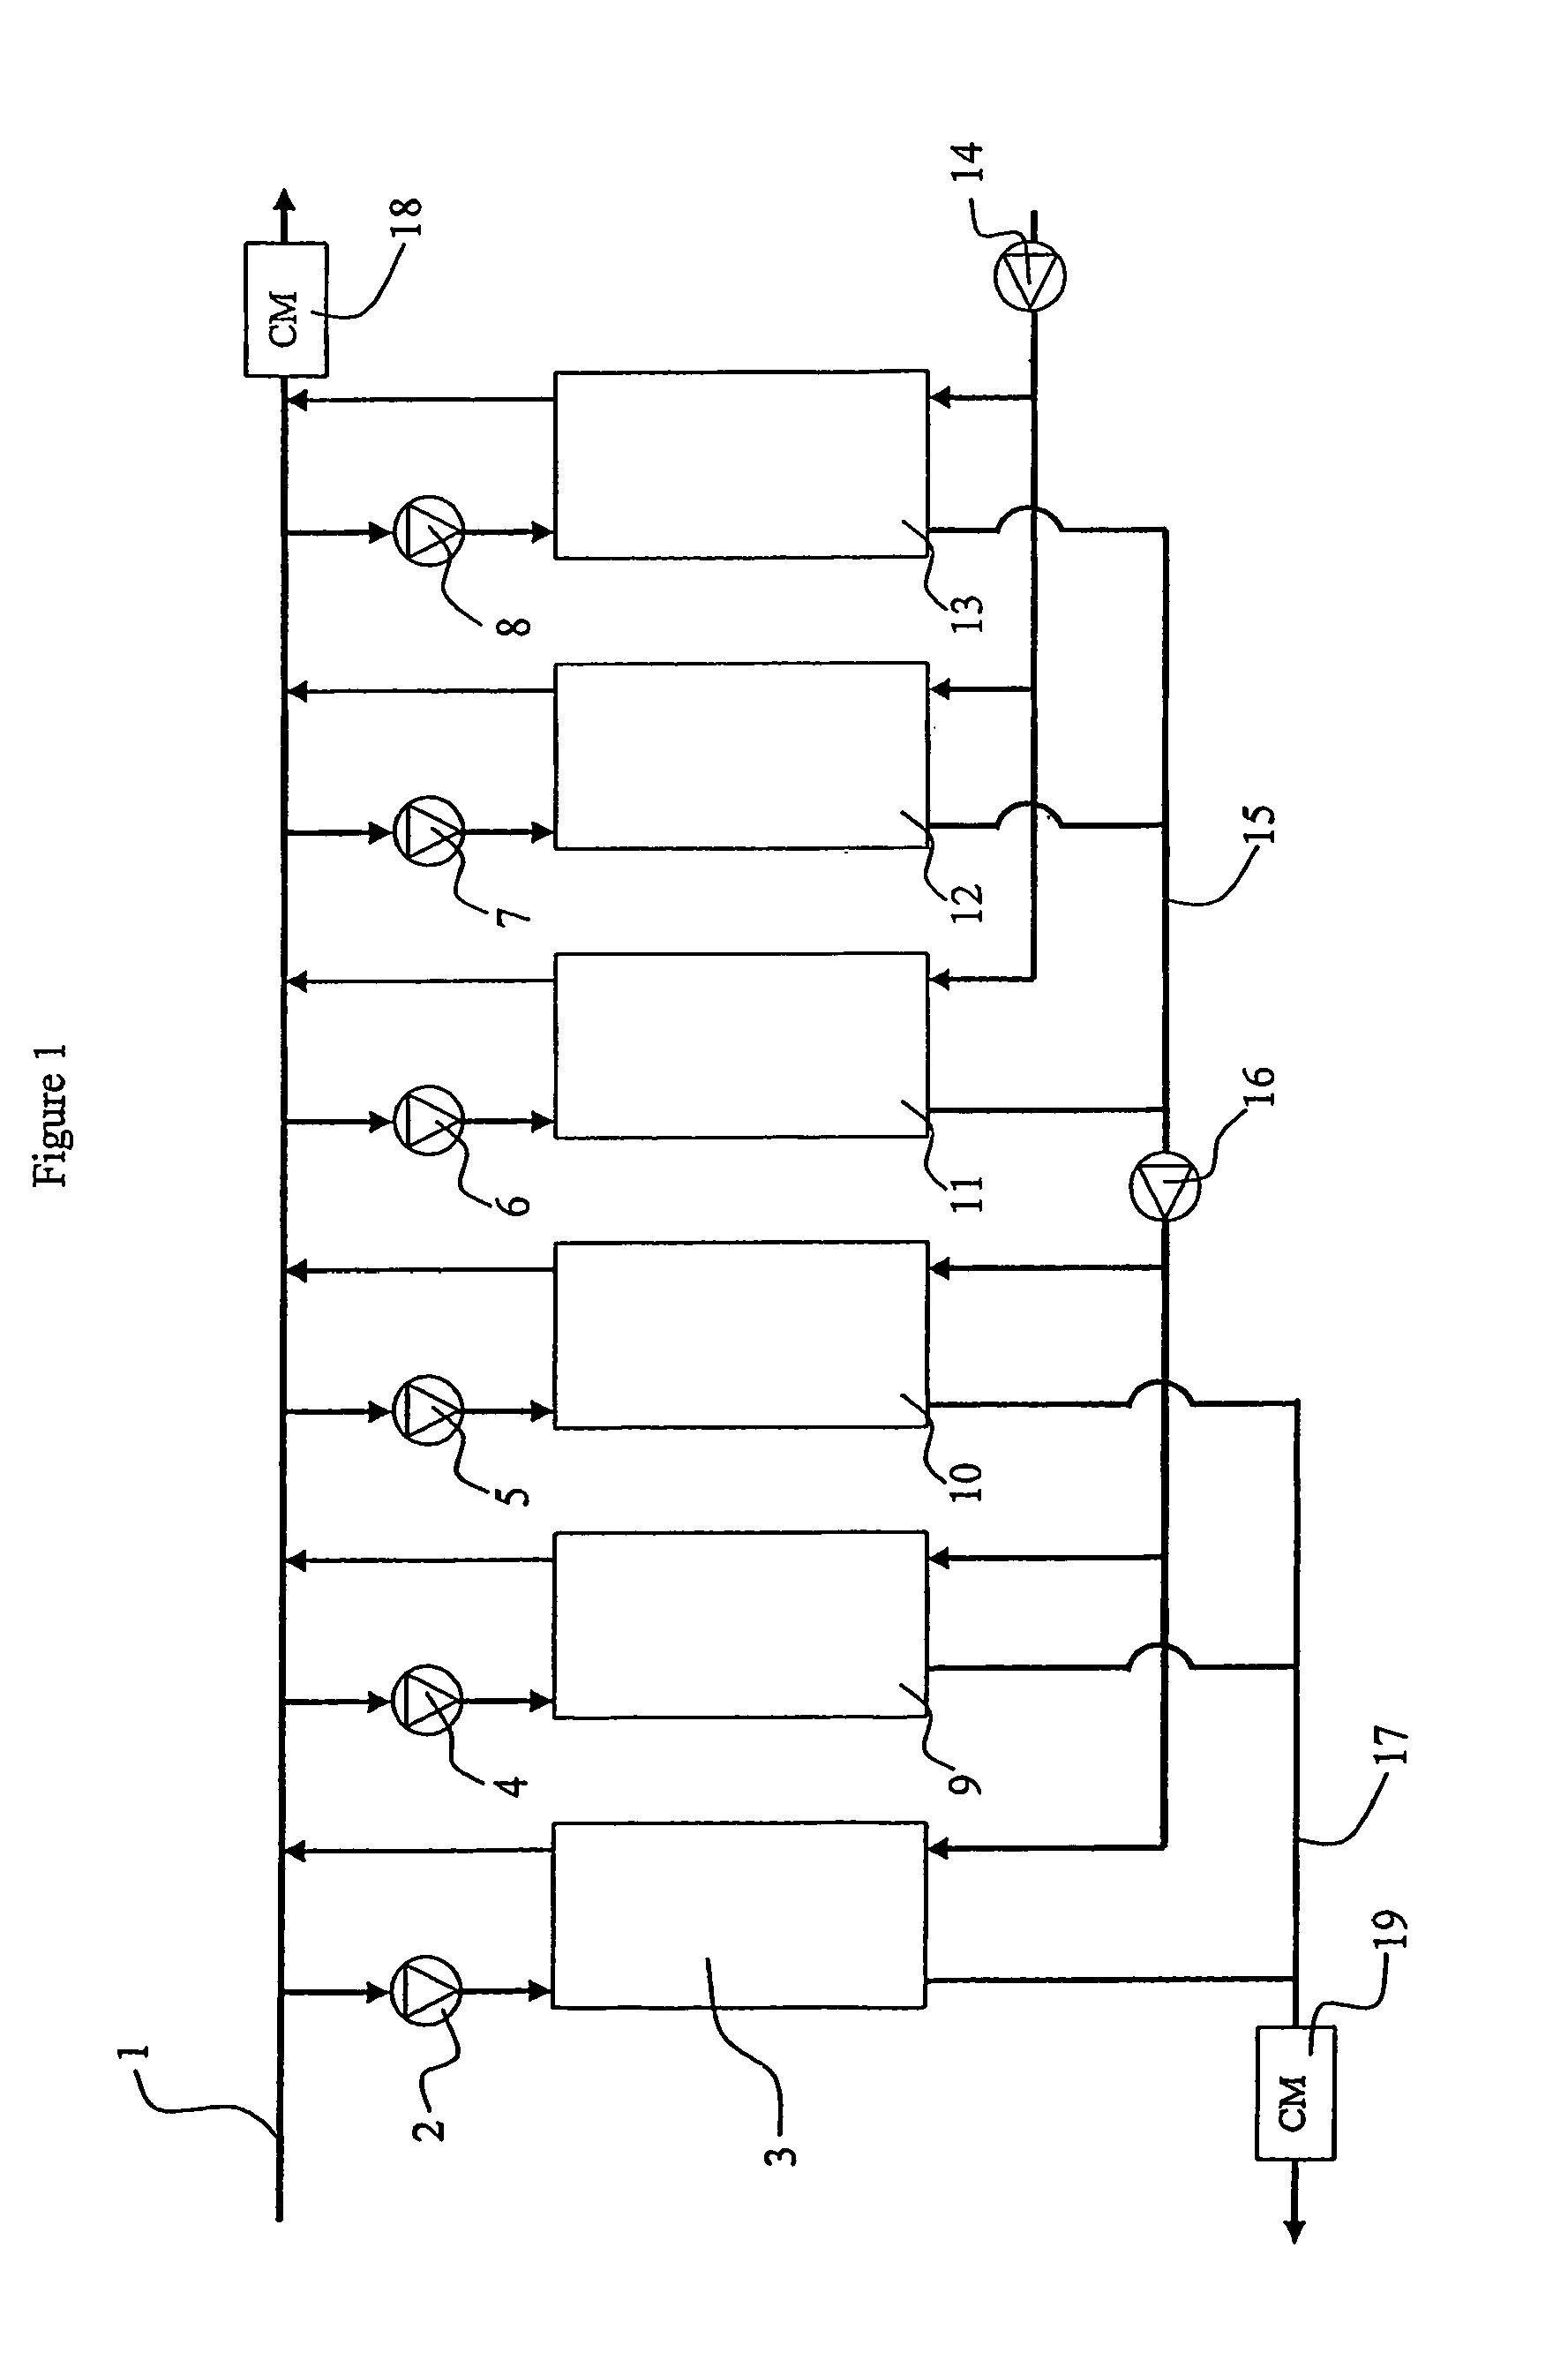 Electrodialysis system and process